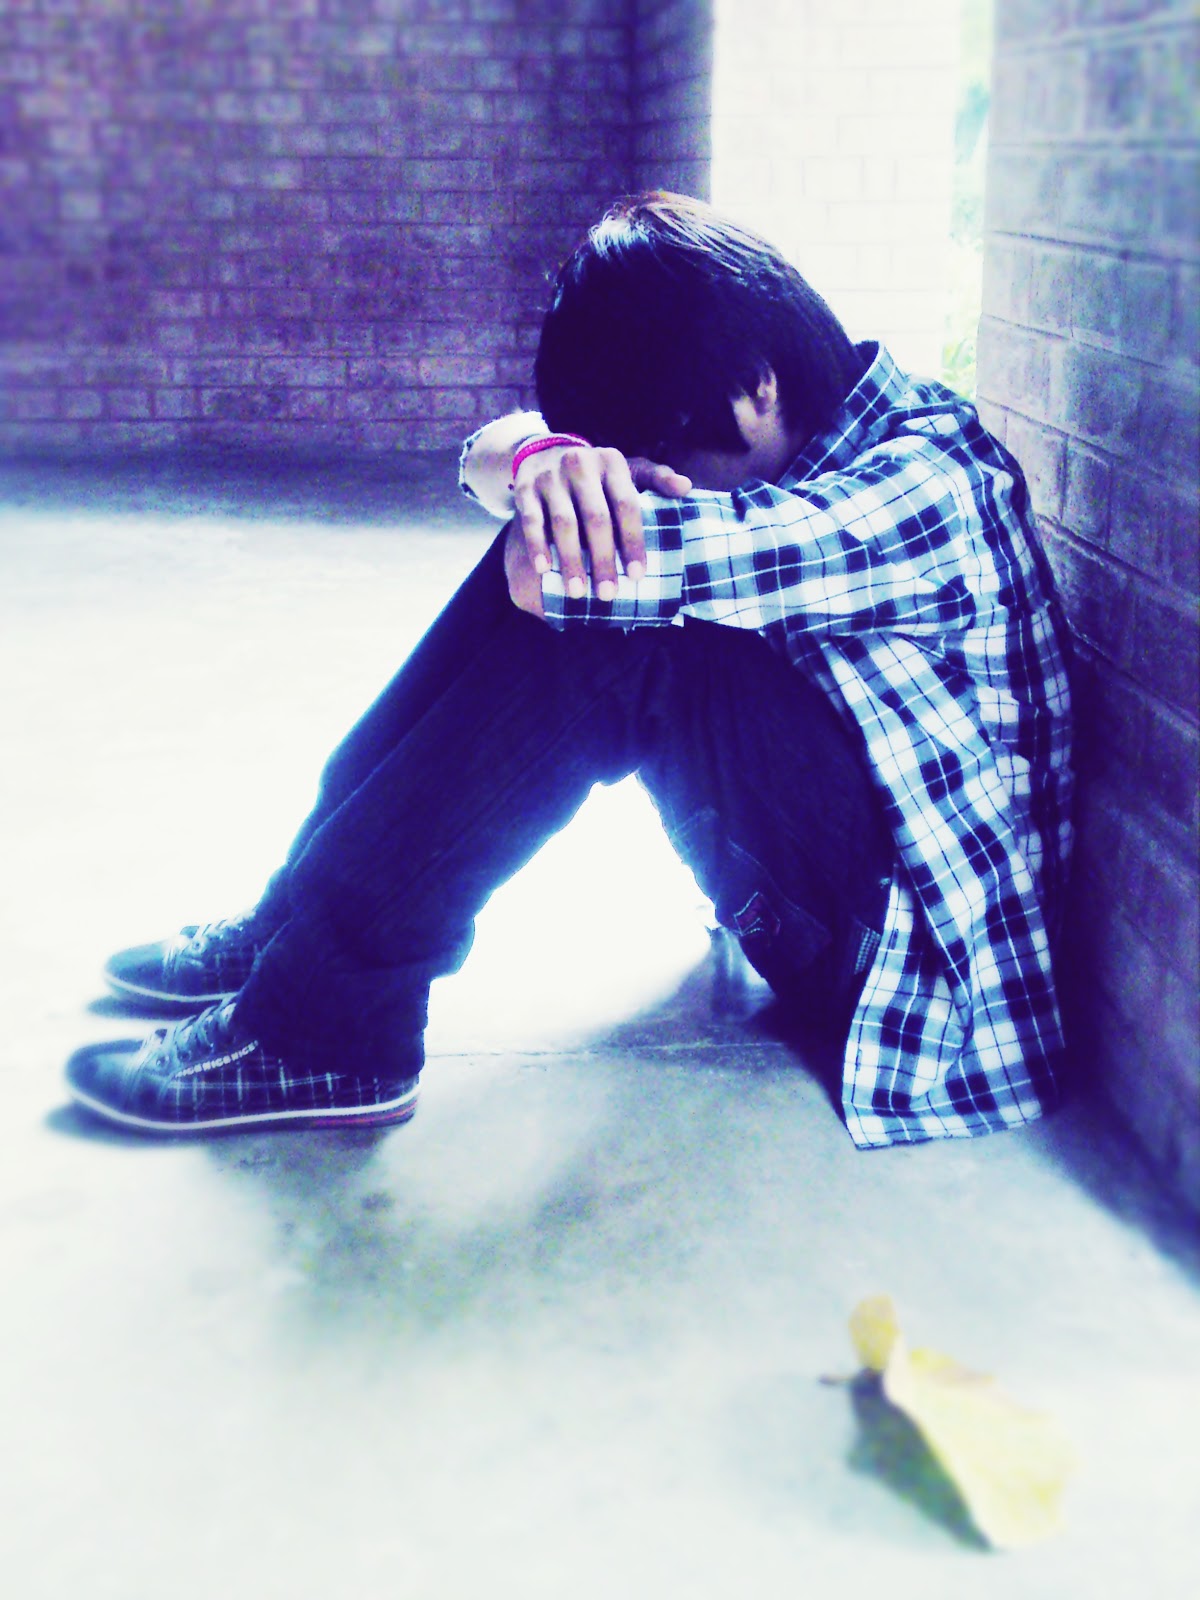 crying-lover-boy-wallpaper-images-photo